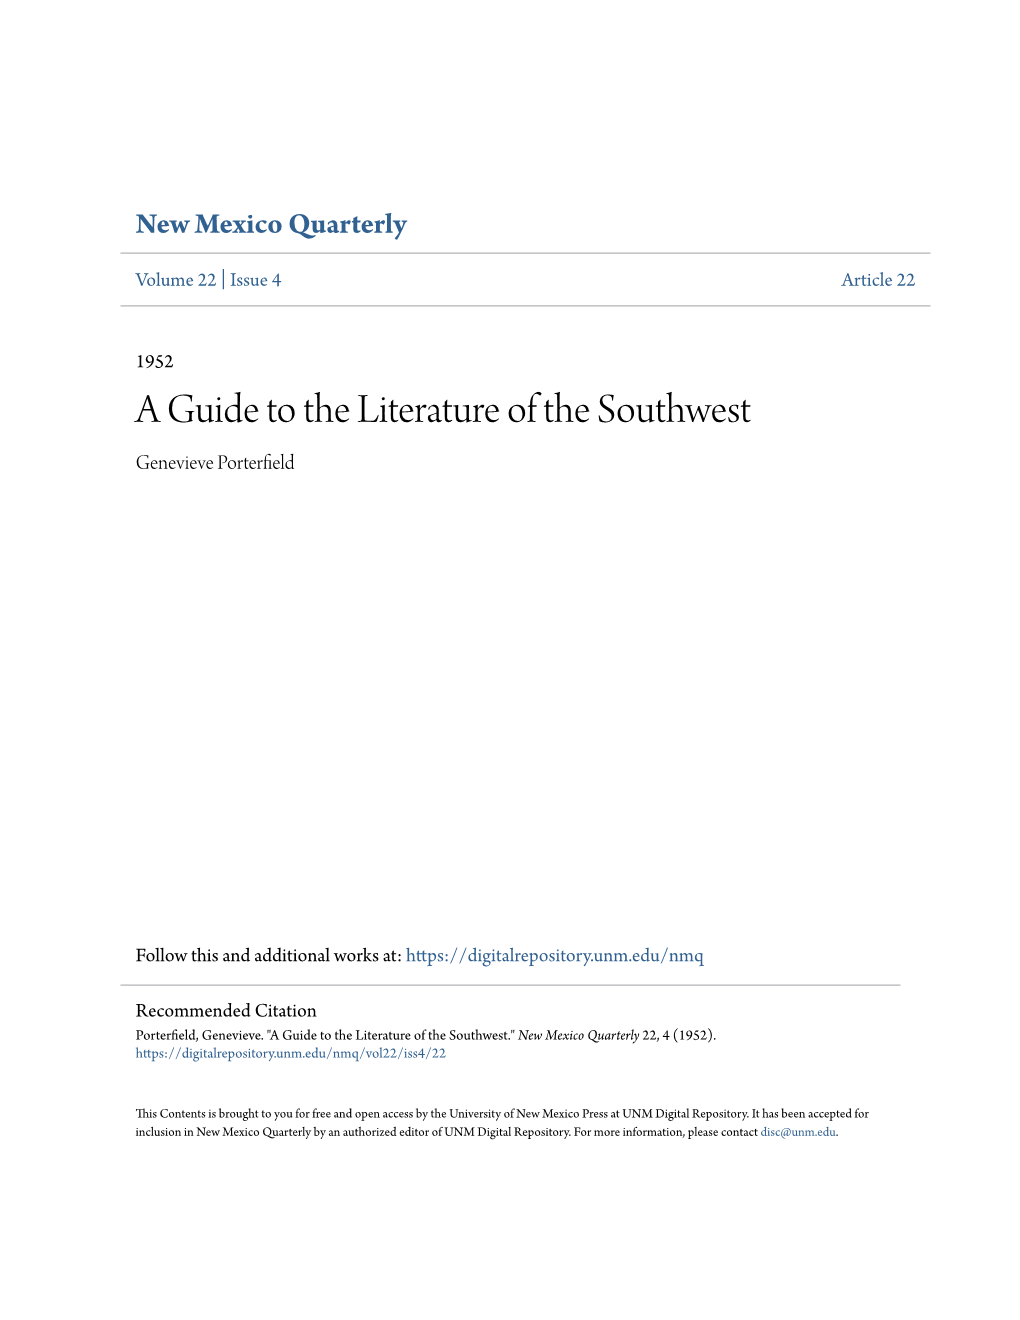 A Guide to the Literature of the Southwest Genevieve Porterfield